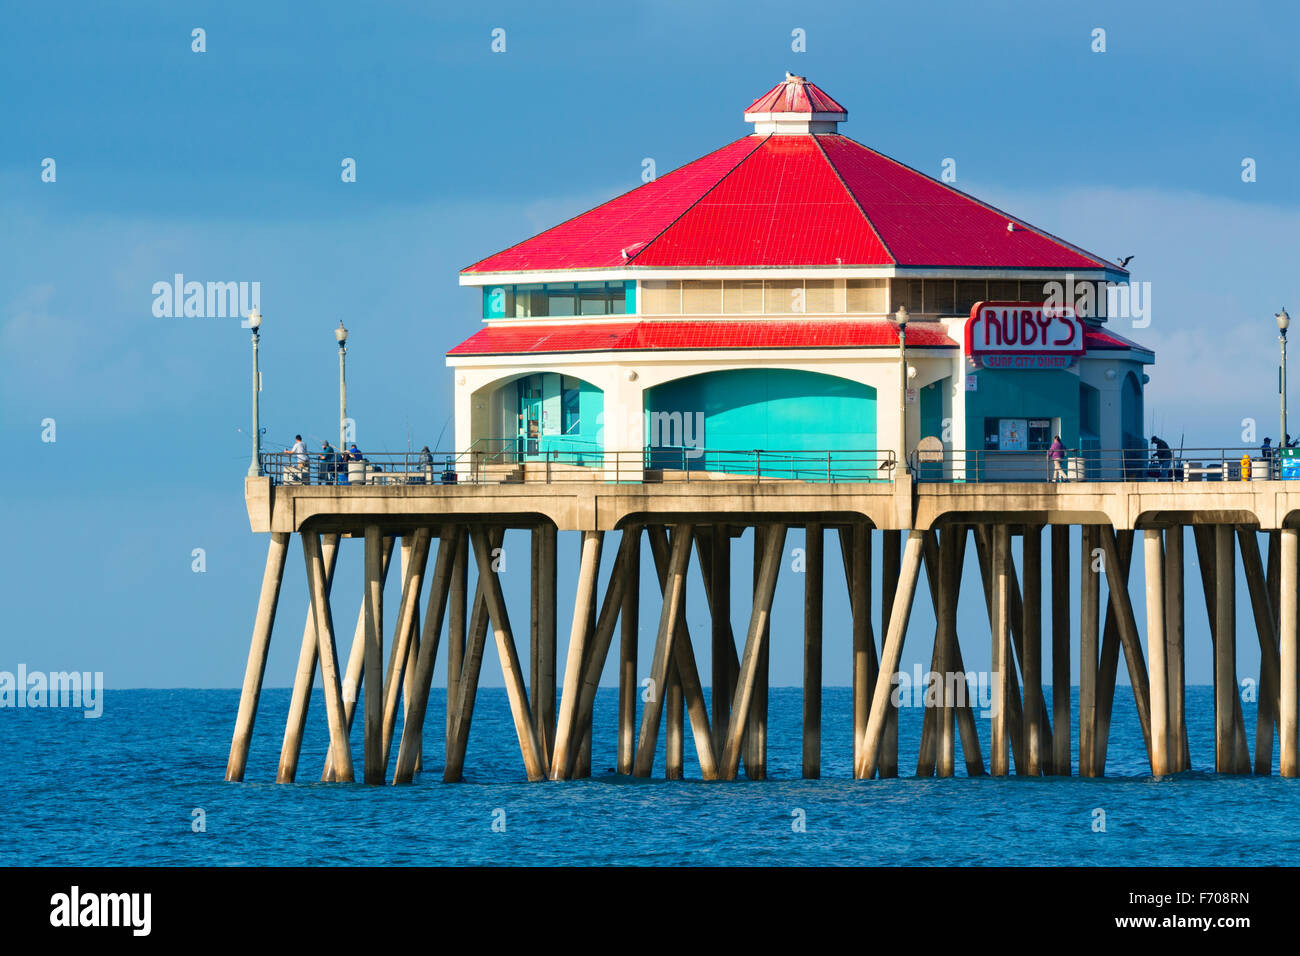 Huntington Beach, CA NOV 15th, 2015: Famous Ruby's restaurant on Huntington Beach pier with its classic bright red roof during a Stock Photo